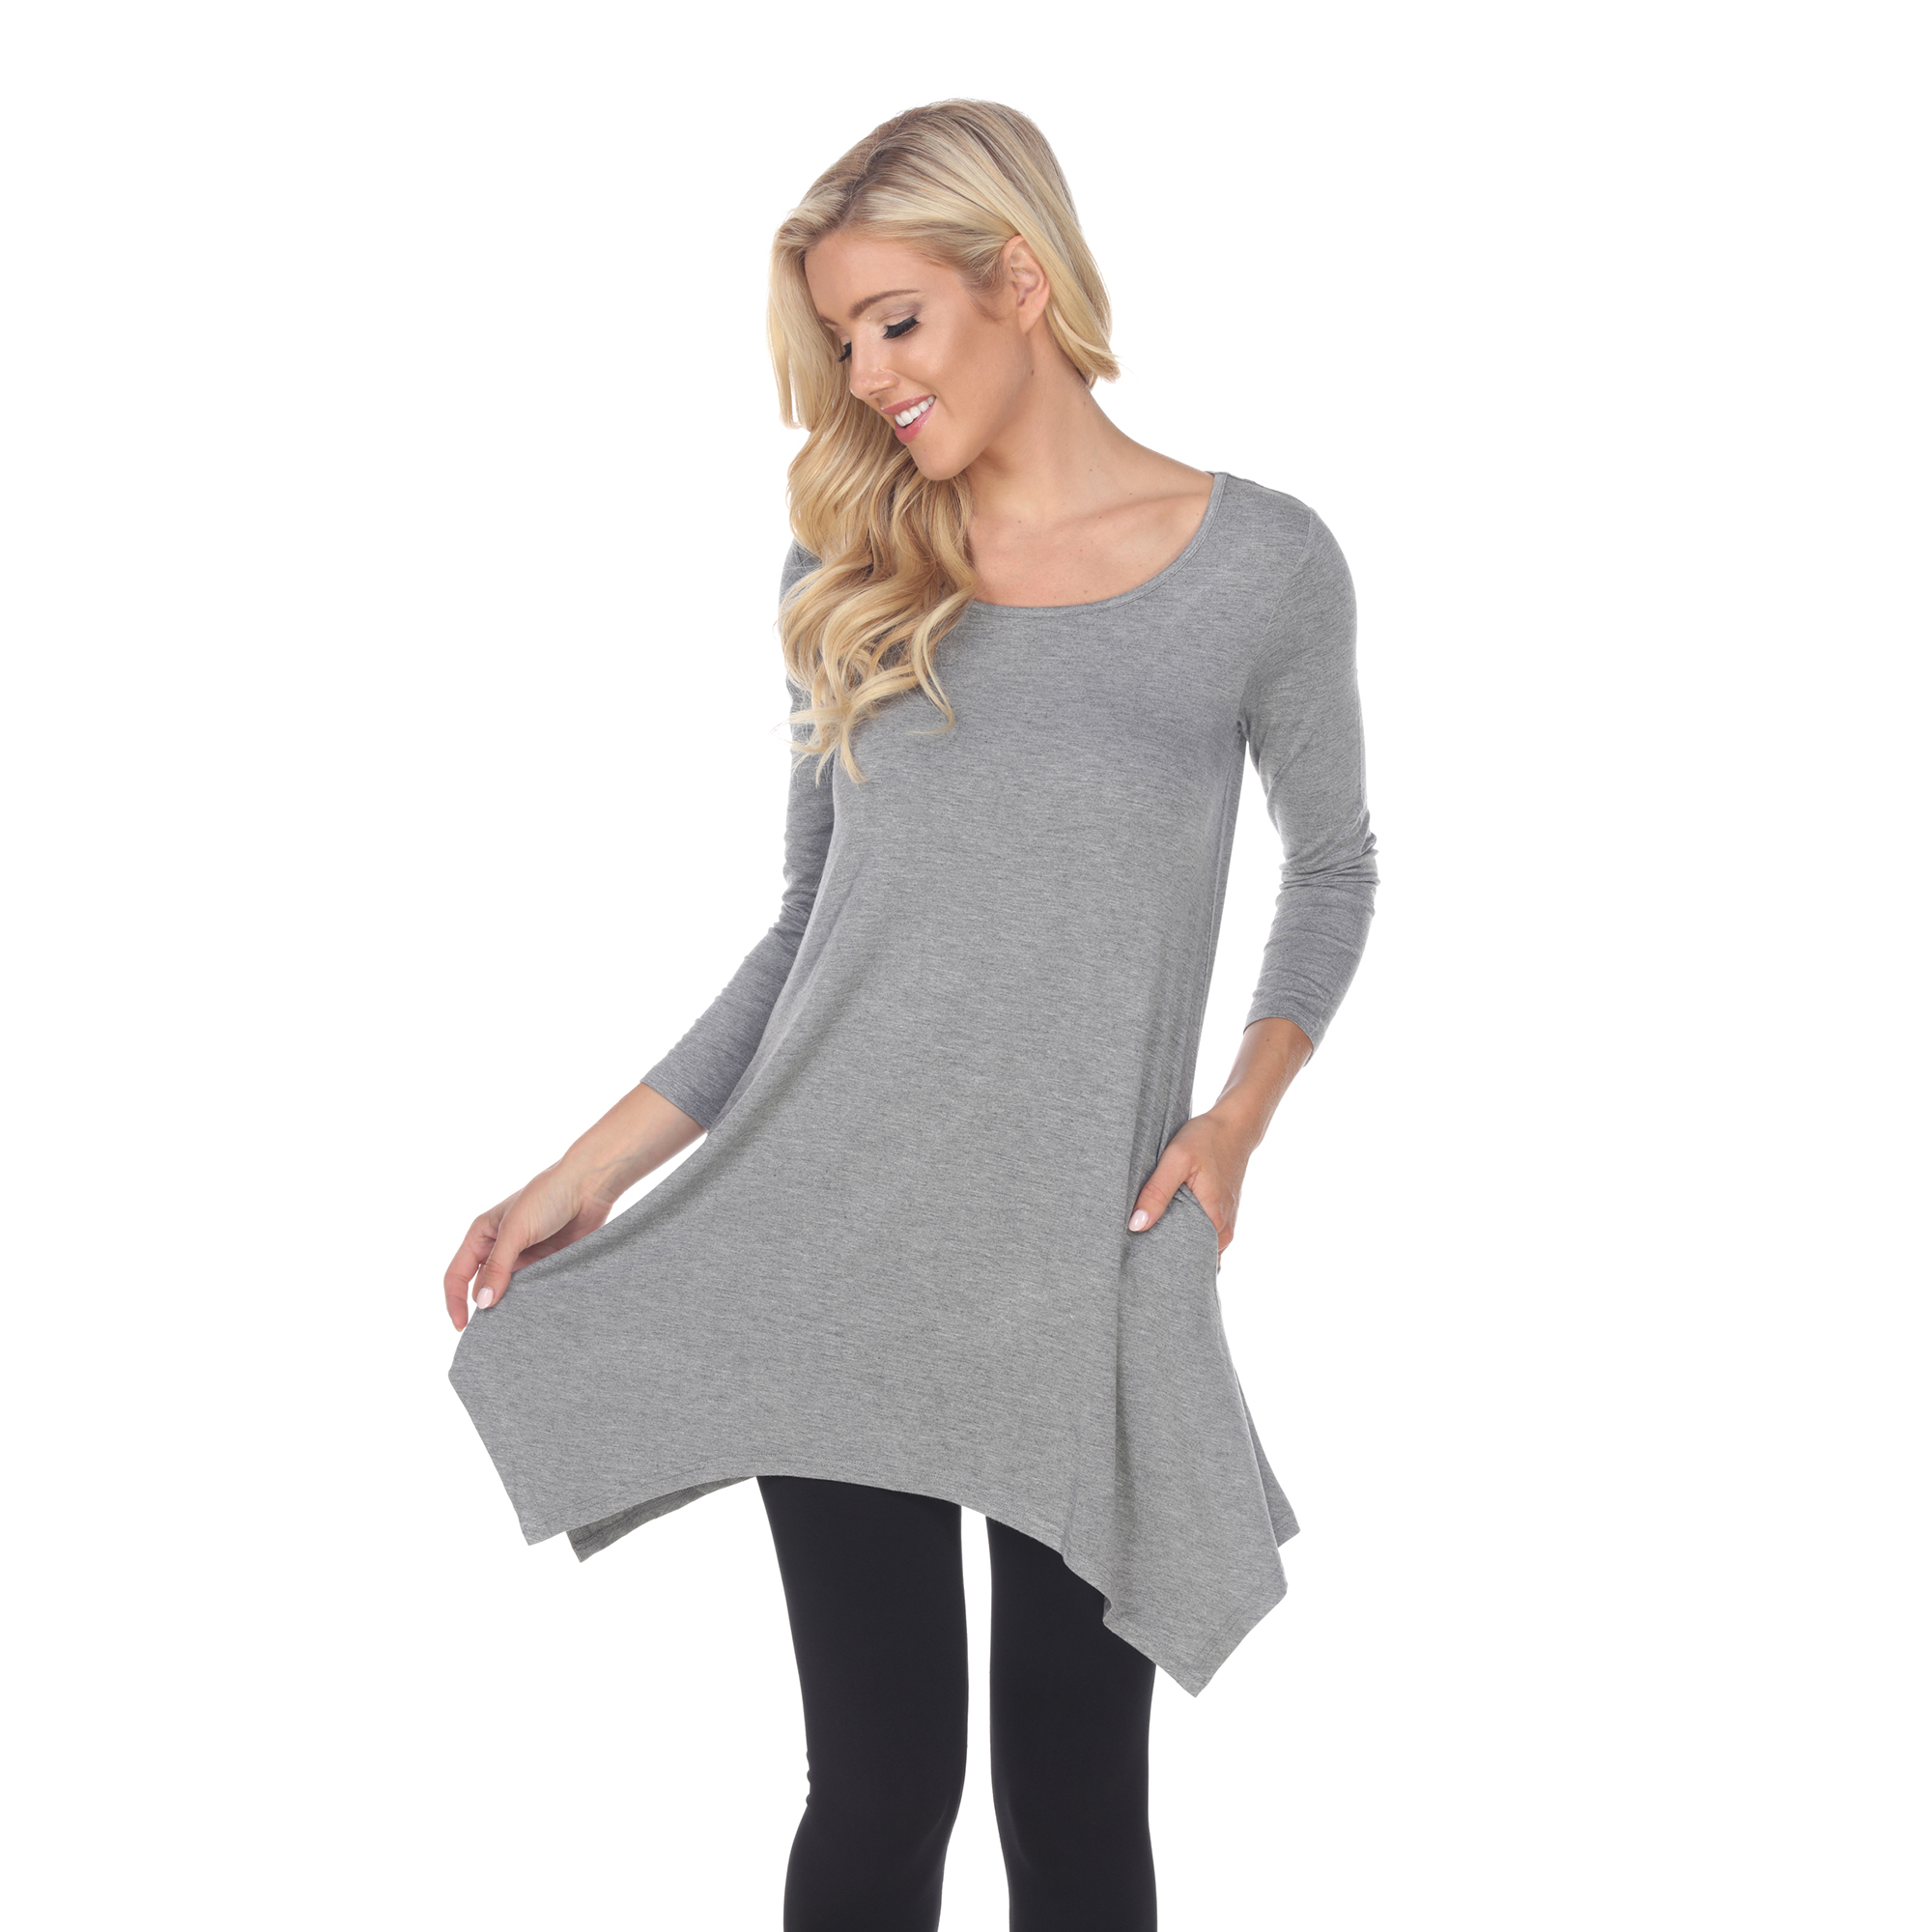 White Mark Women's Quarter Sleeve Tunic Top With Pockets - Charcoal, 6X